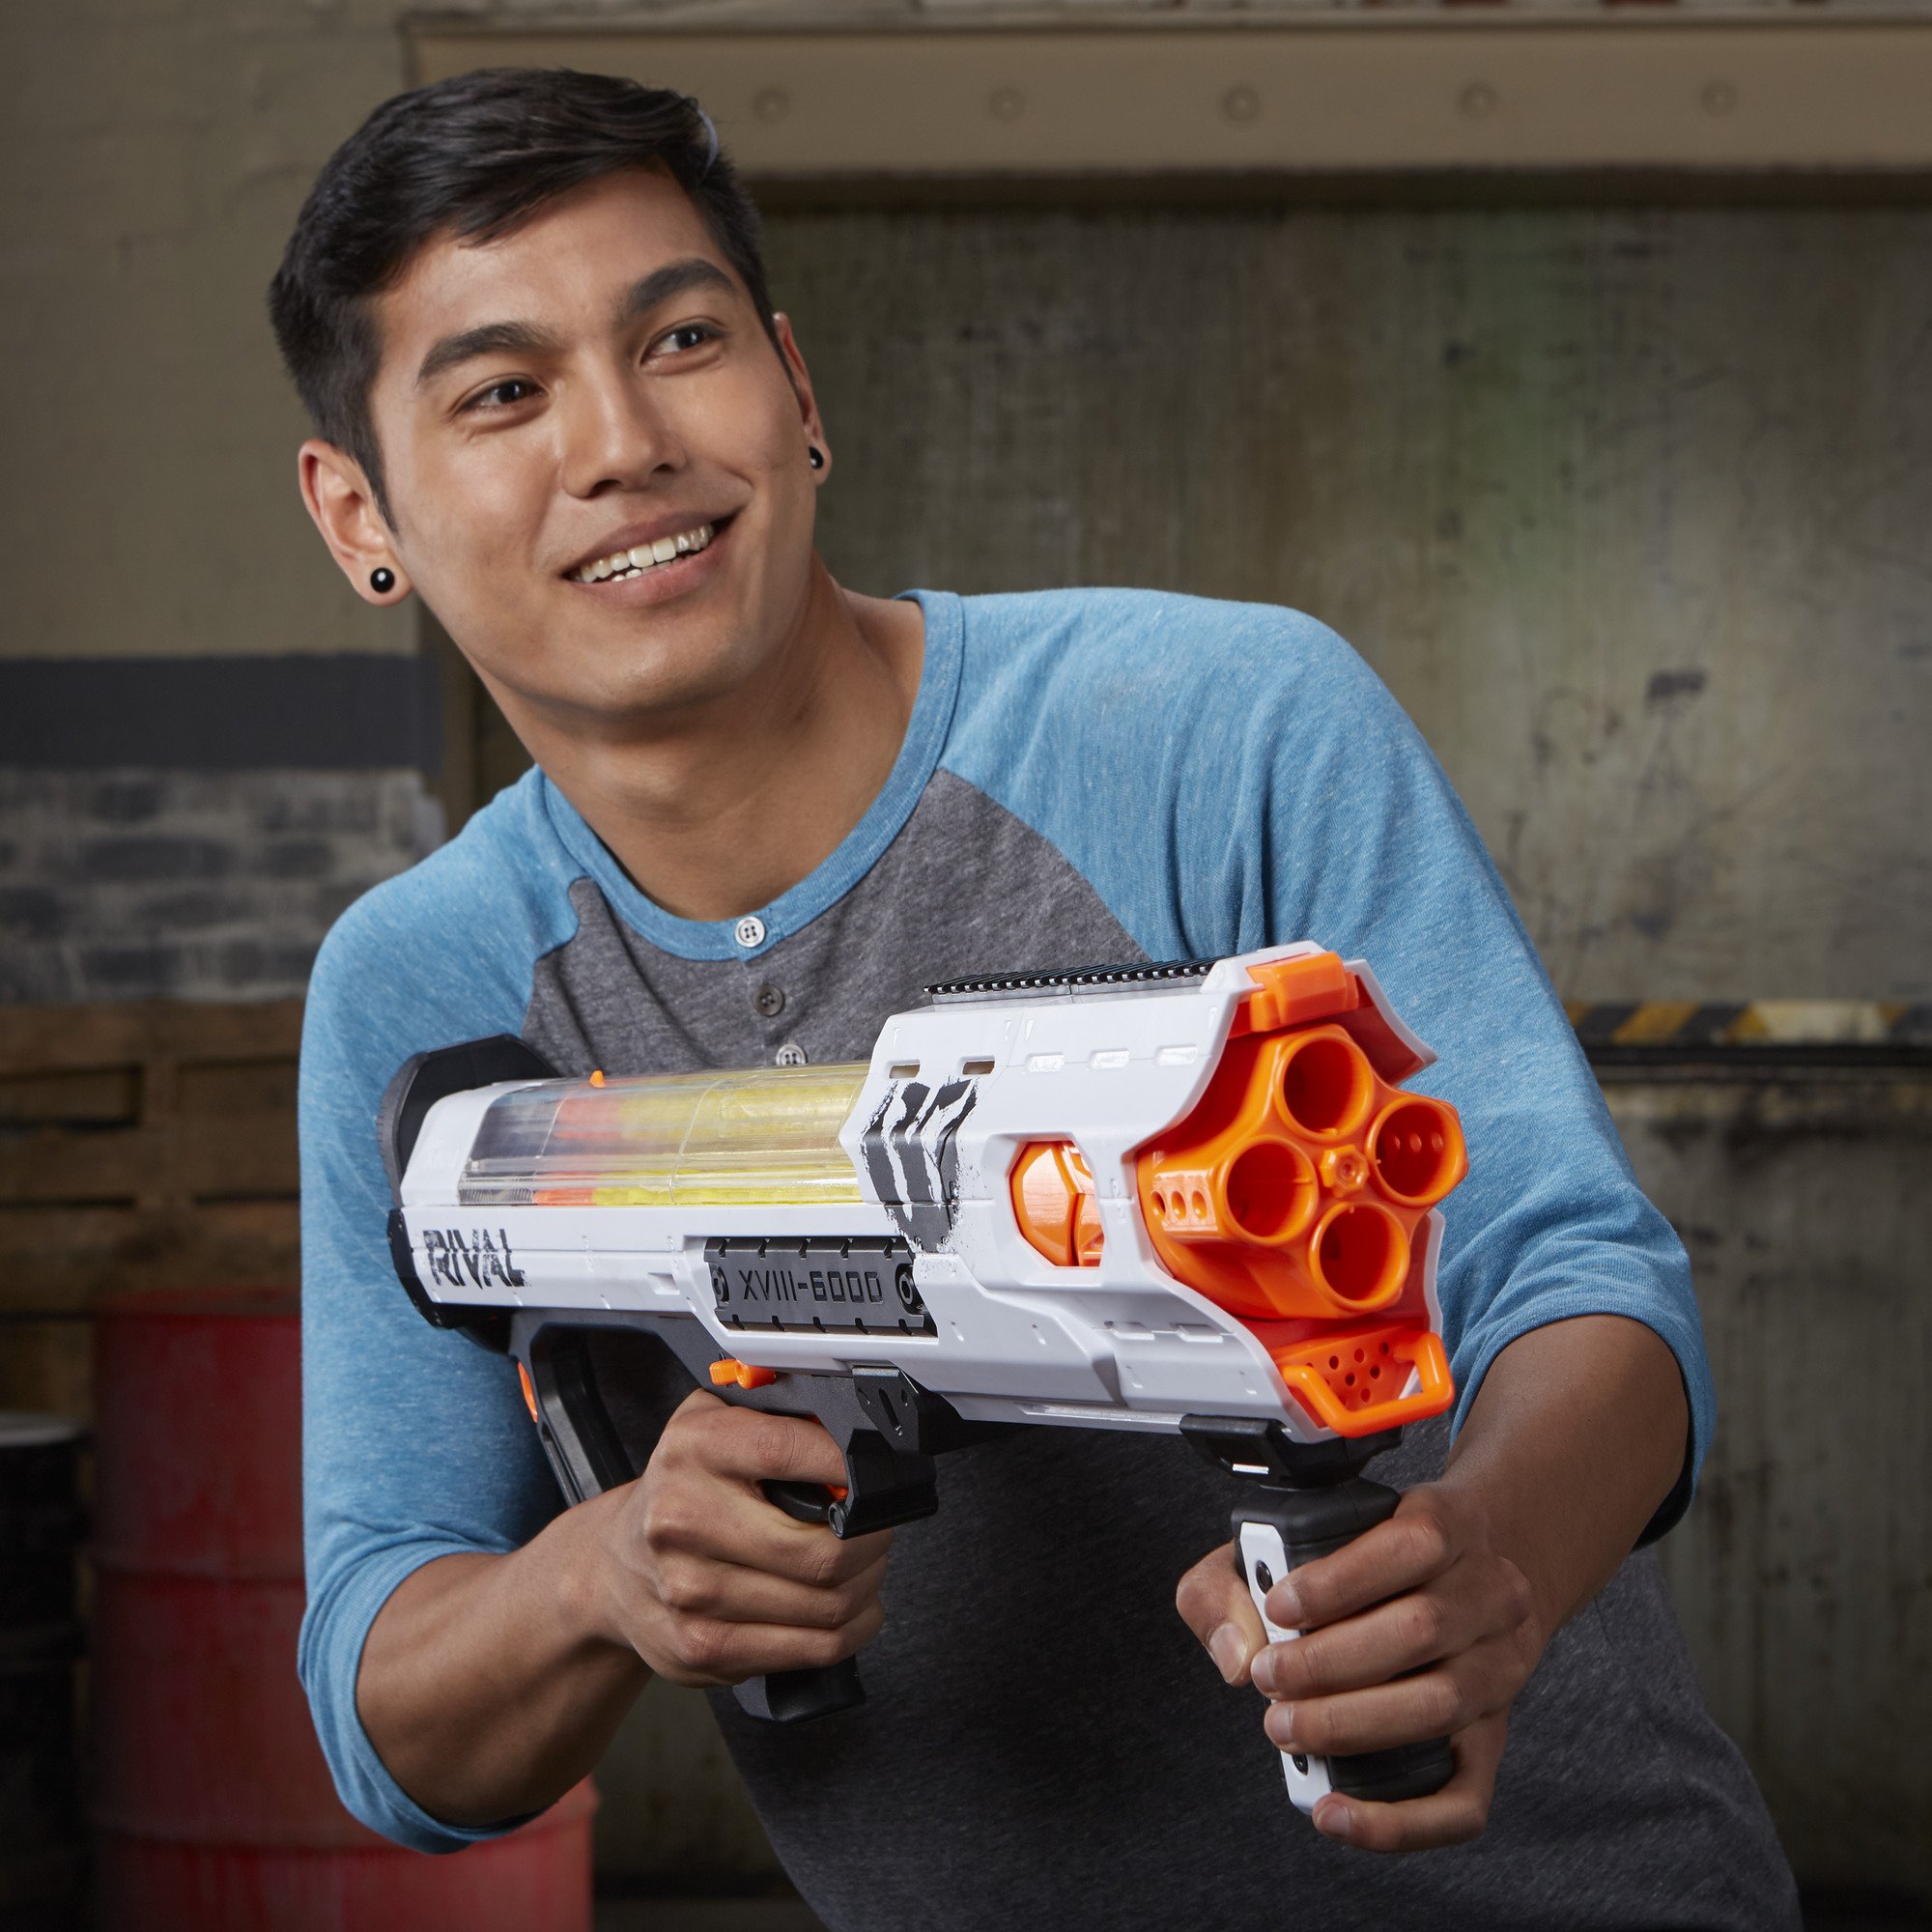 Nerf Rival Phantom Corps Hades XVIII-6000 Blaster with Rival Ammo and Colored Flags for Ages 14+ (Amazon Exclusive)